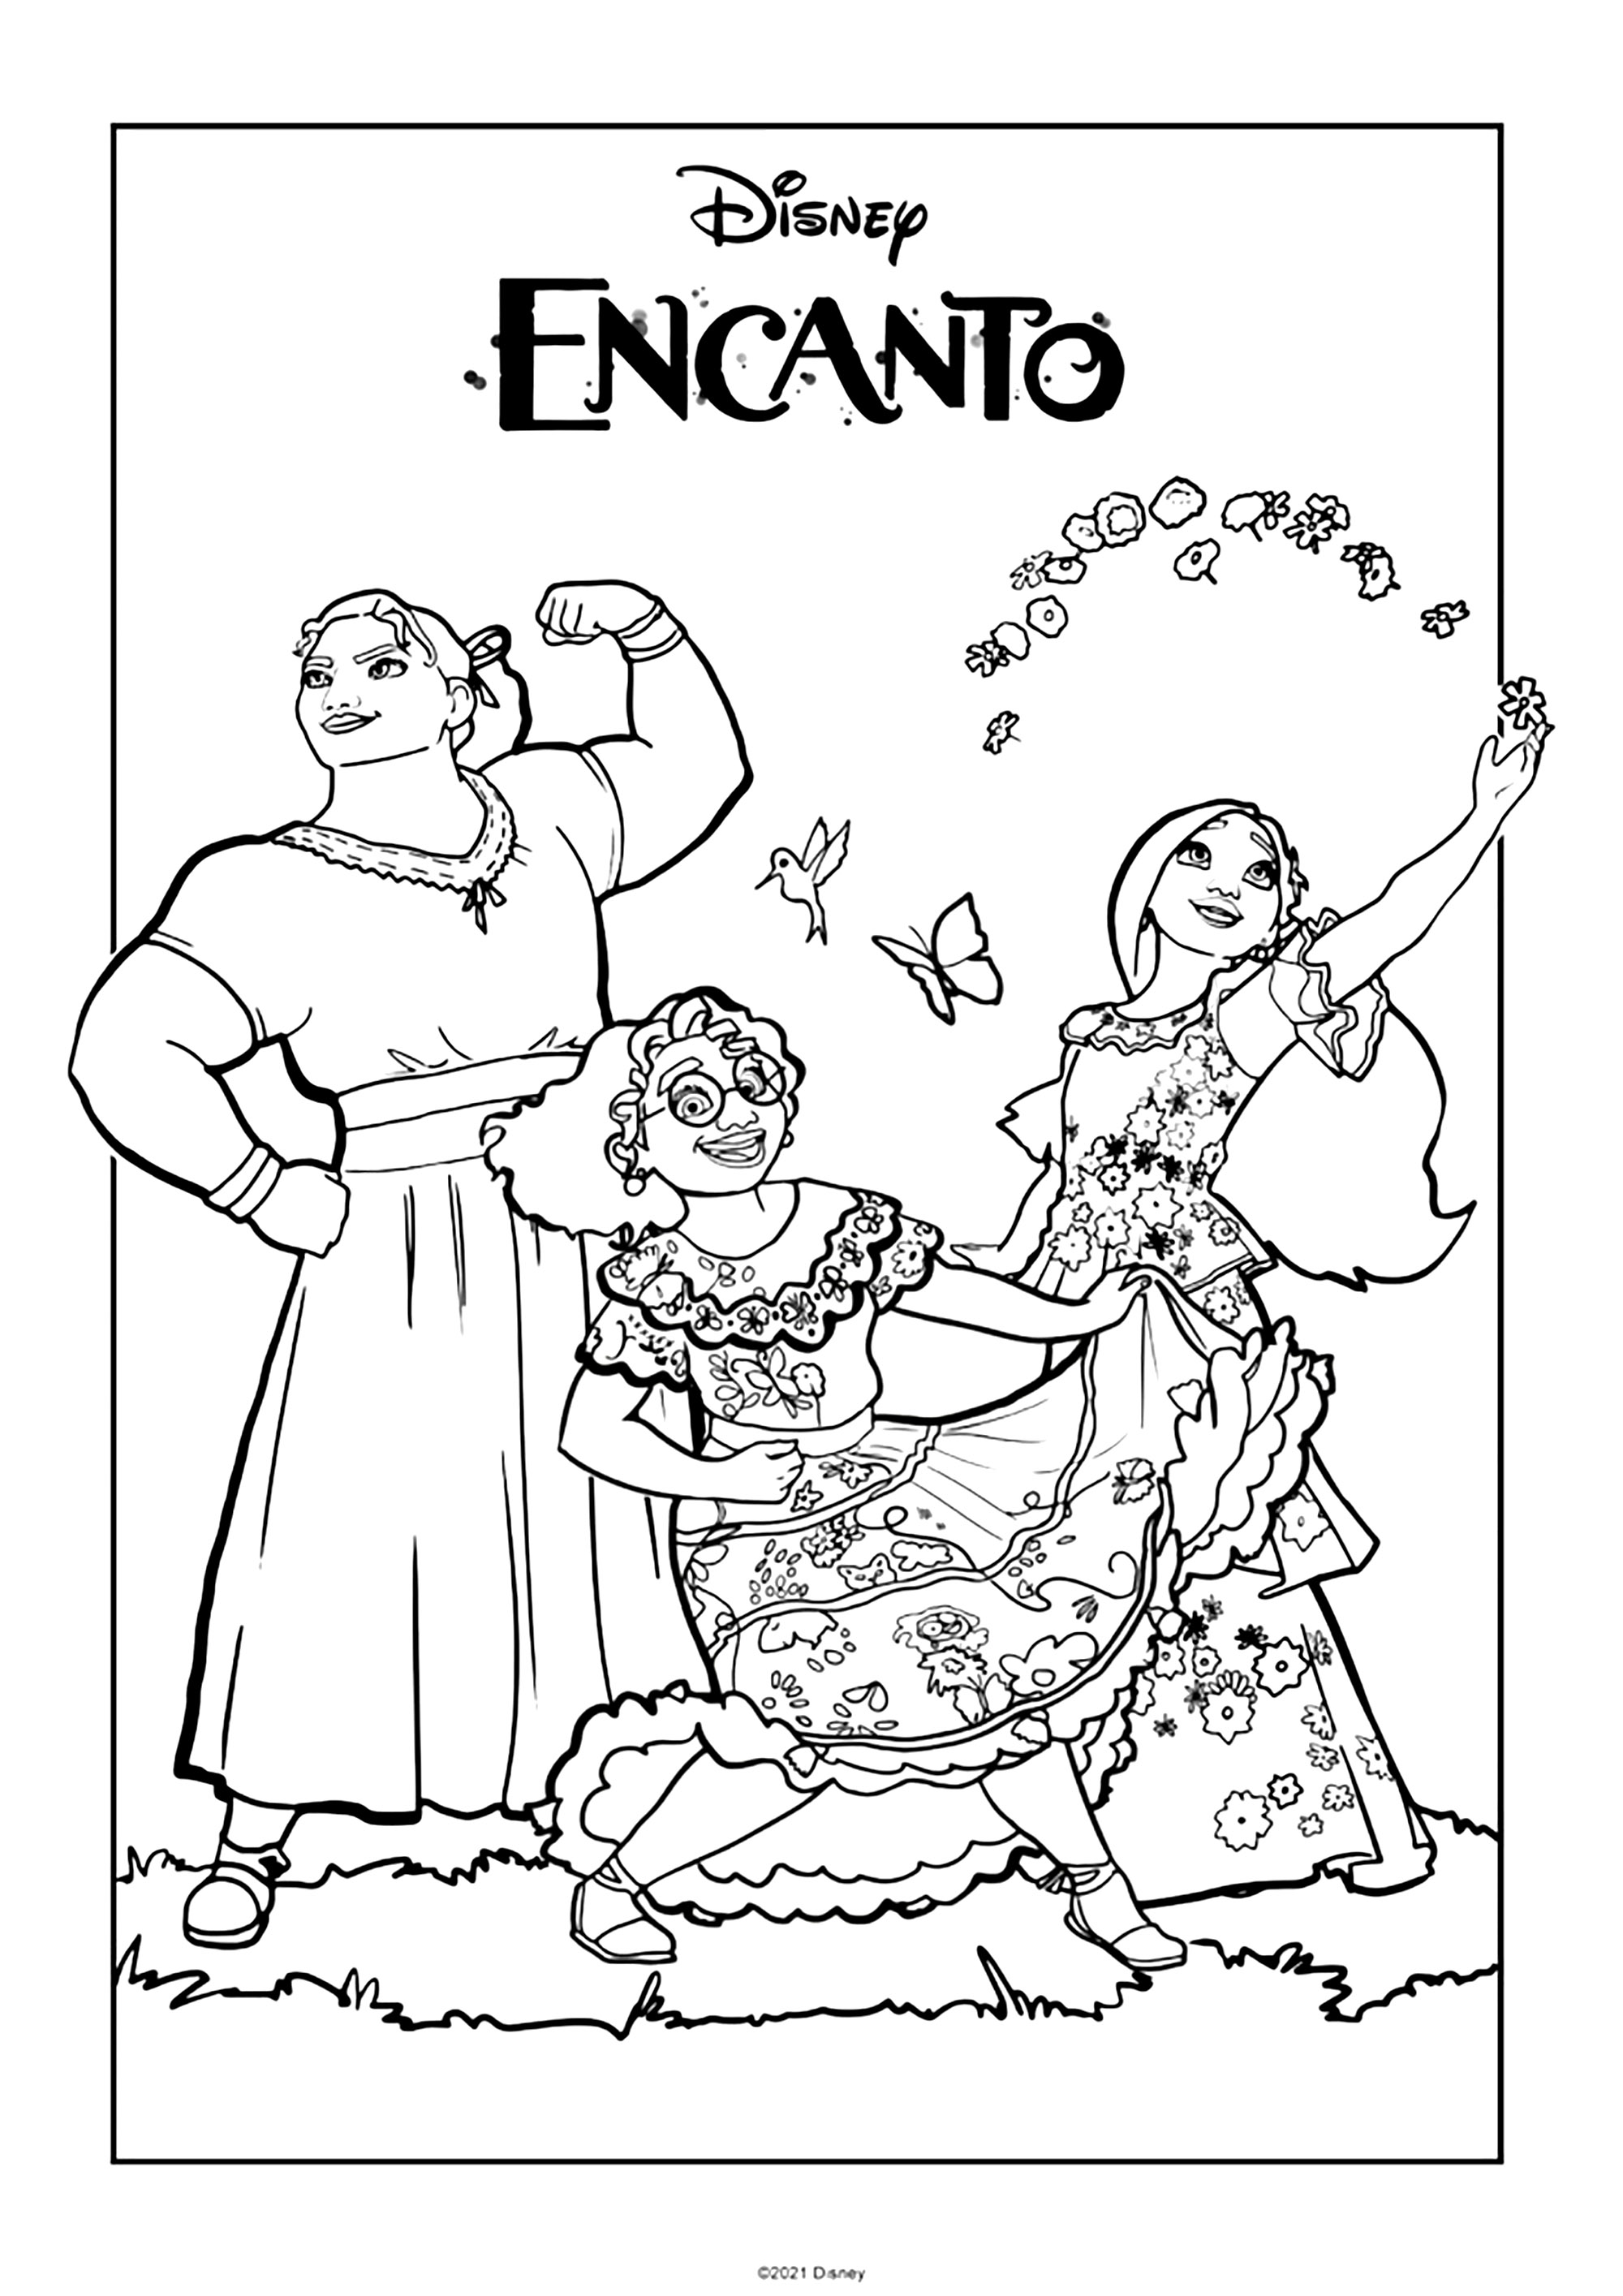 https://www.justcolor.net/kids/wp-content/uploads/sites/12/nggallery/encanto/coloring-pages-for-children-encanto-4881.jpg